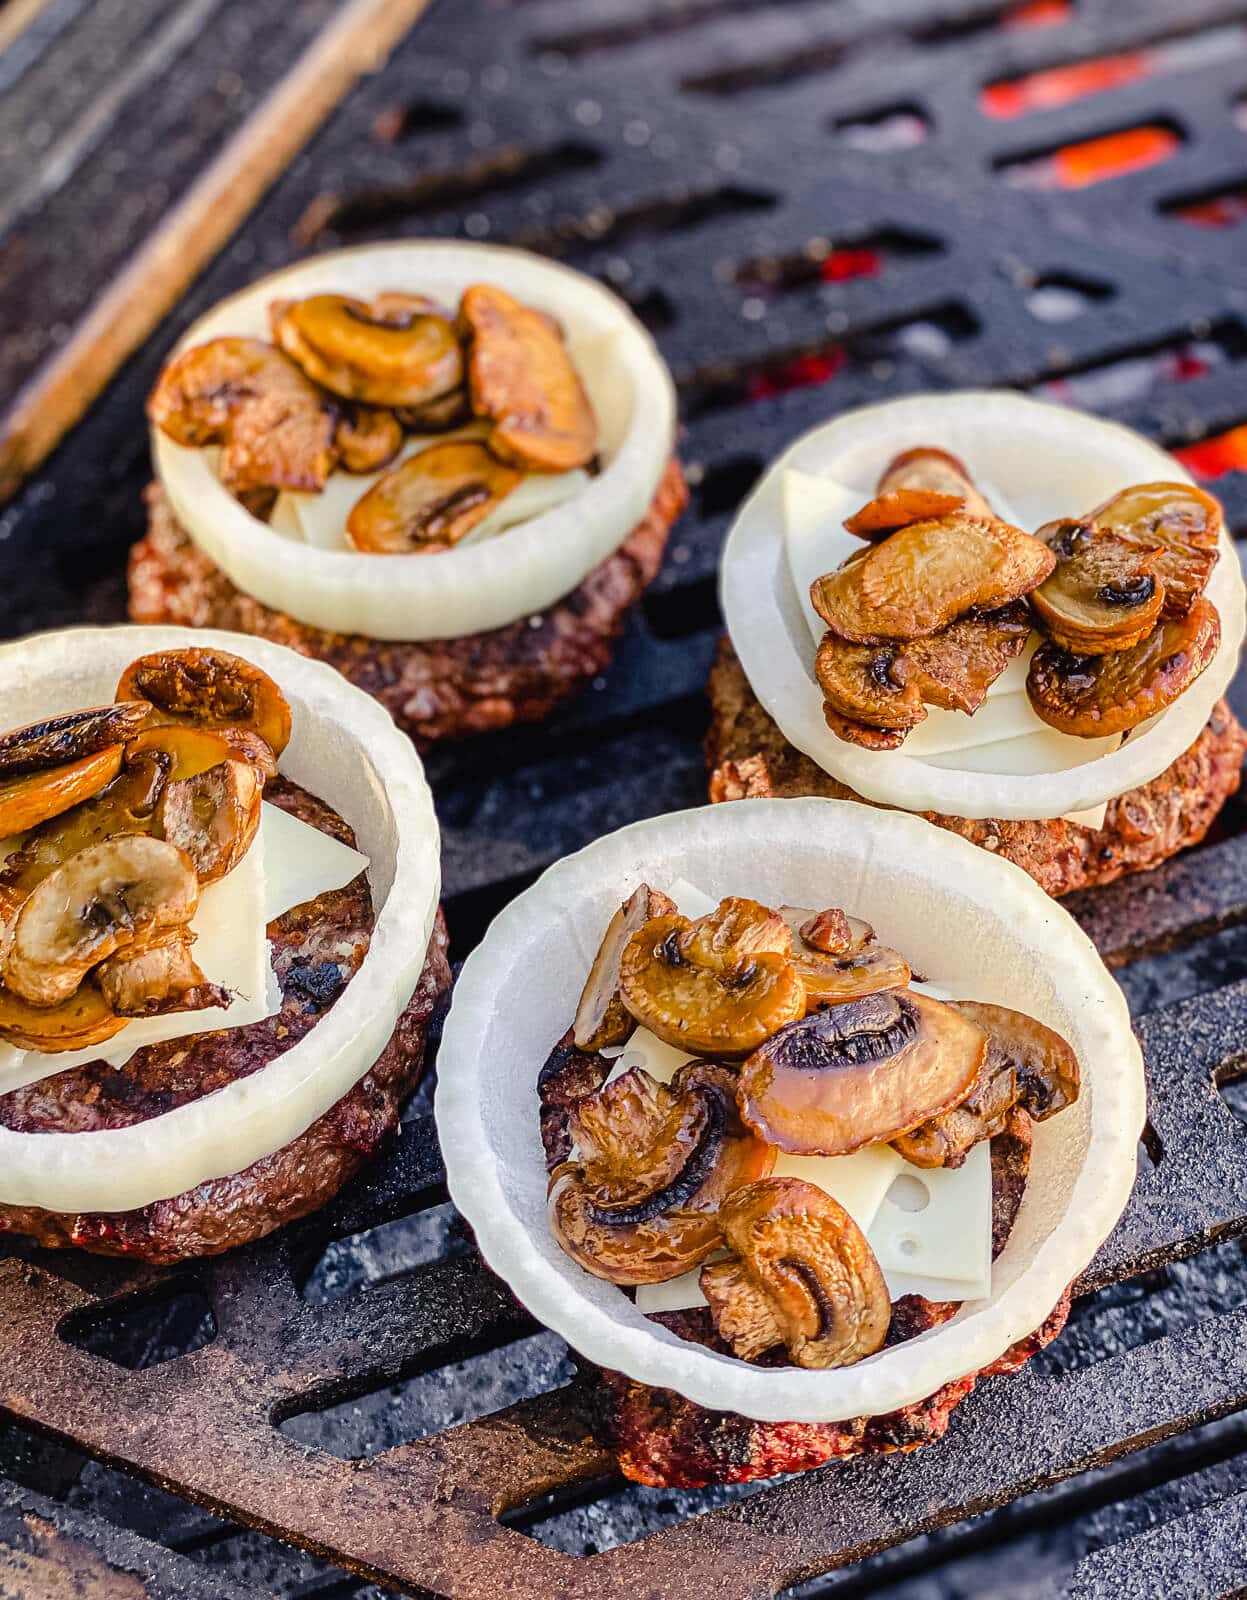 venison burgers topped with mushrooms